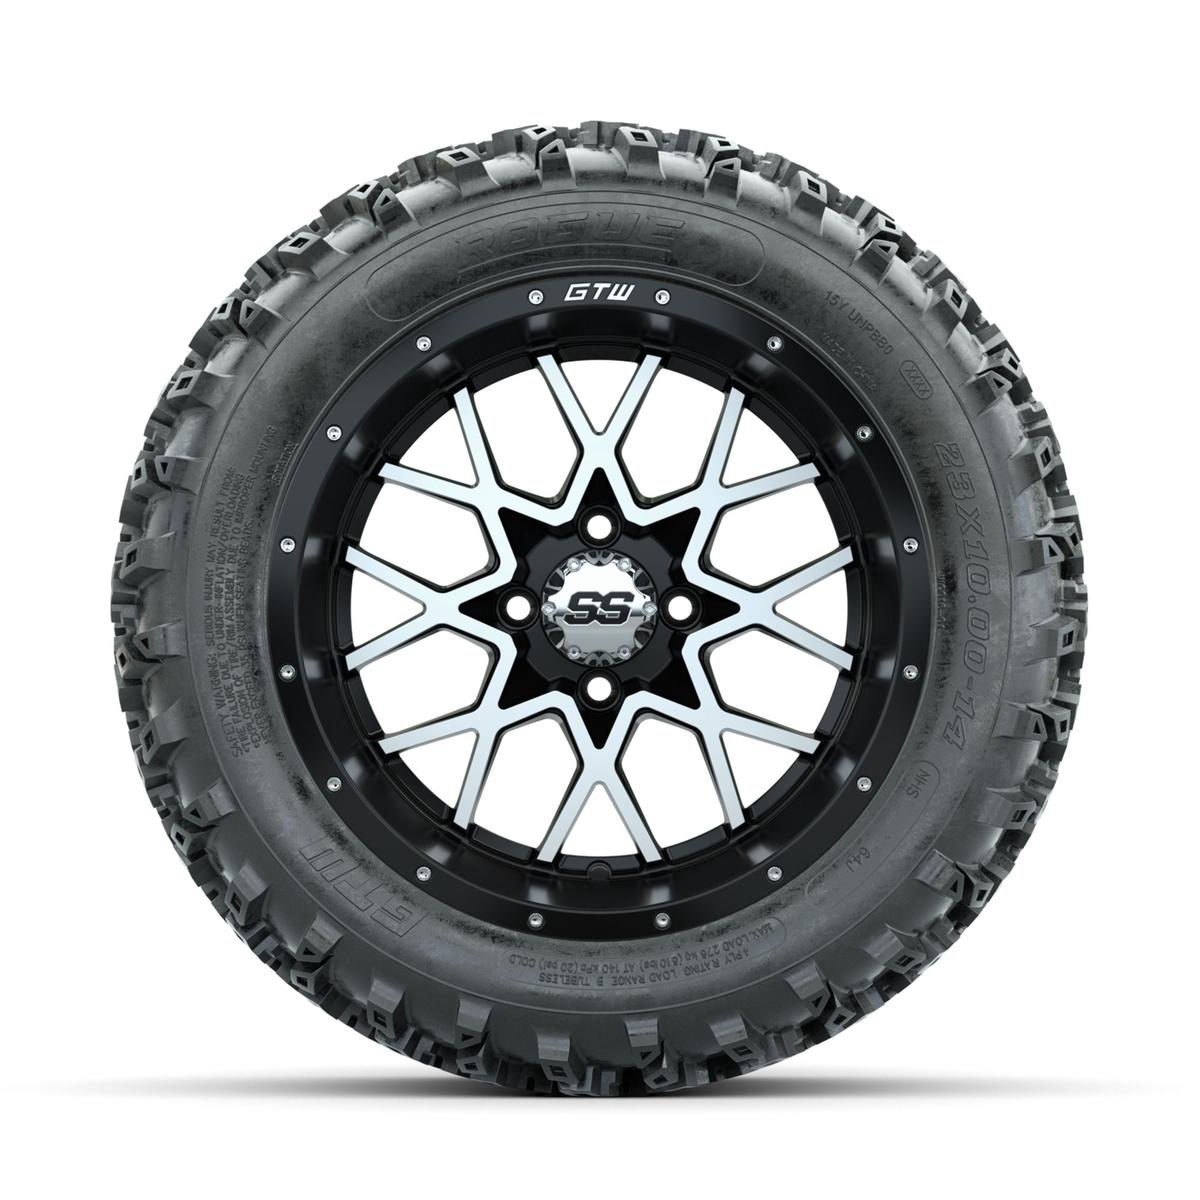 GTW Vortex Machined/Matte Black 14 in Wheels with 23x10.00-14 Rogue All Terrain Tires – Full Set